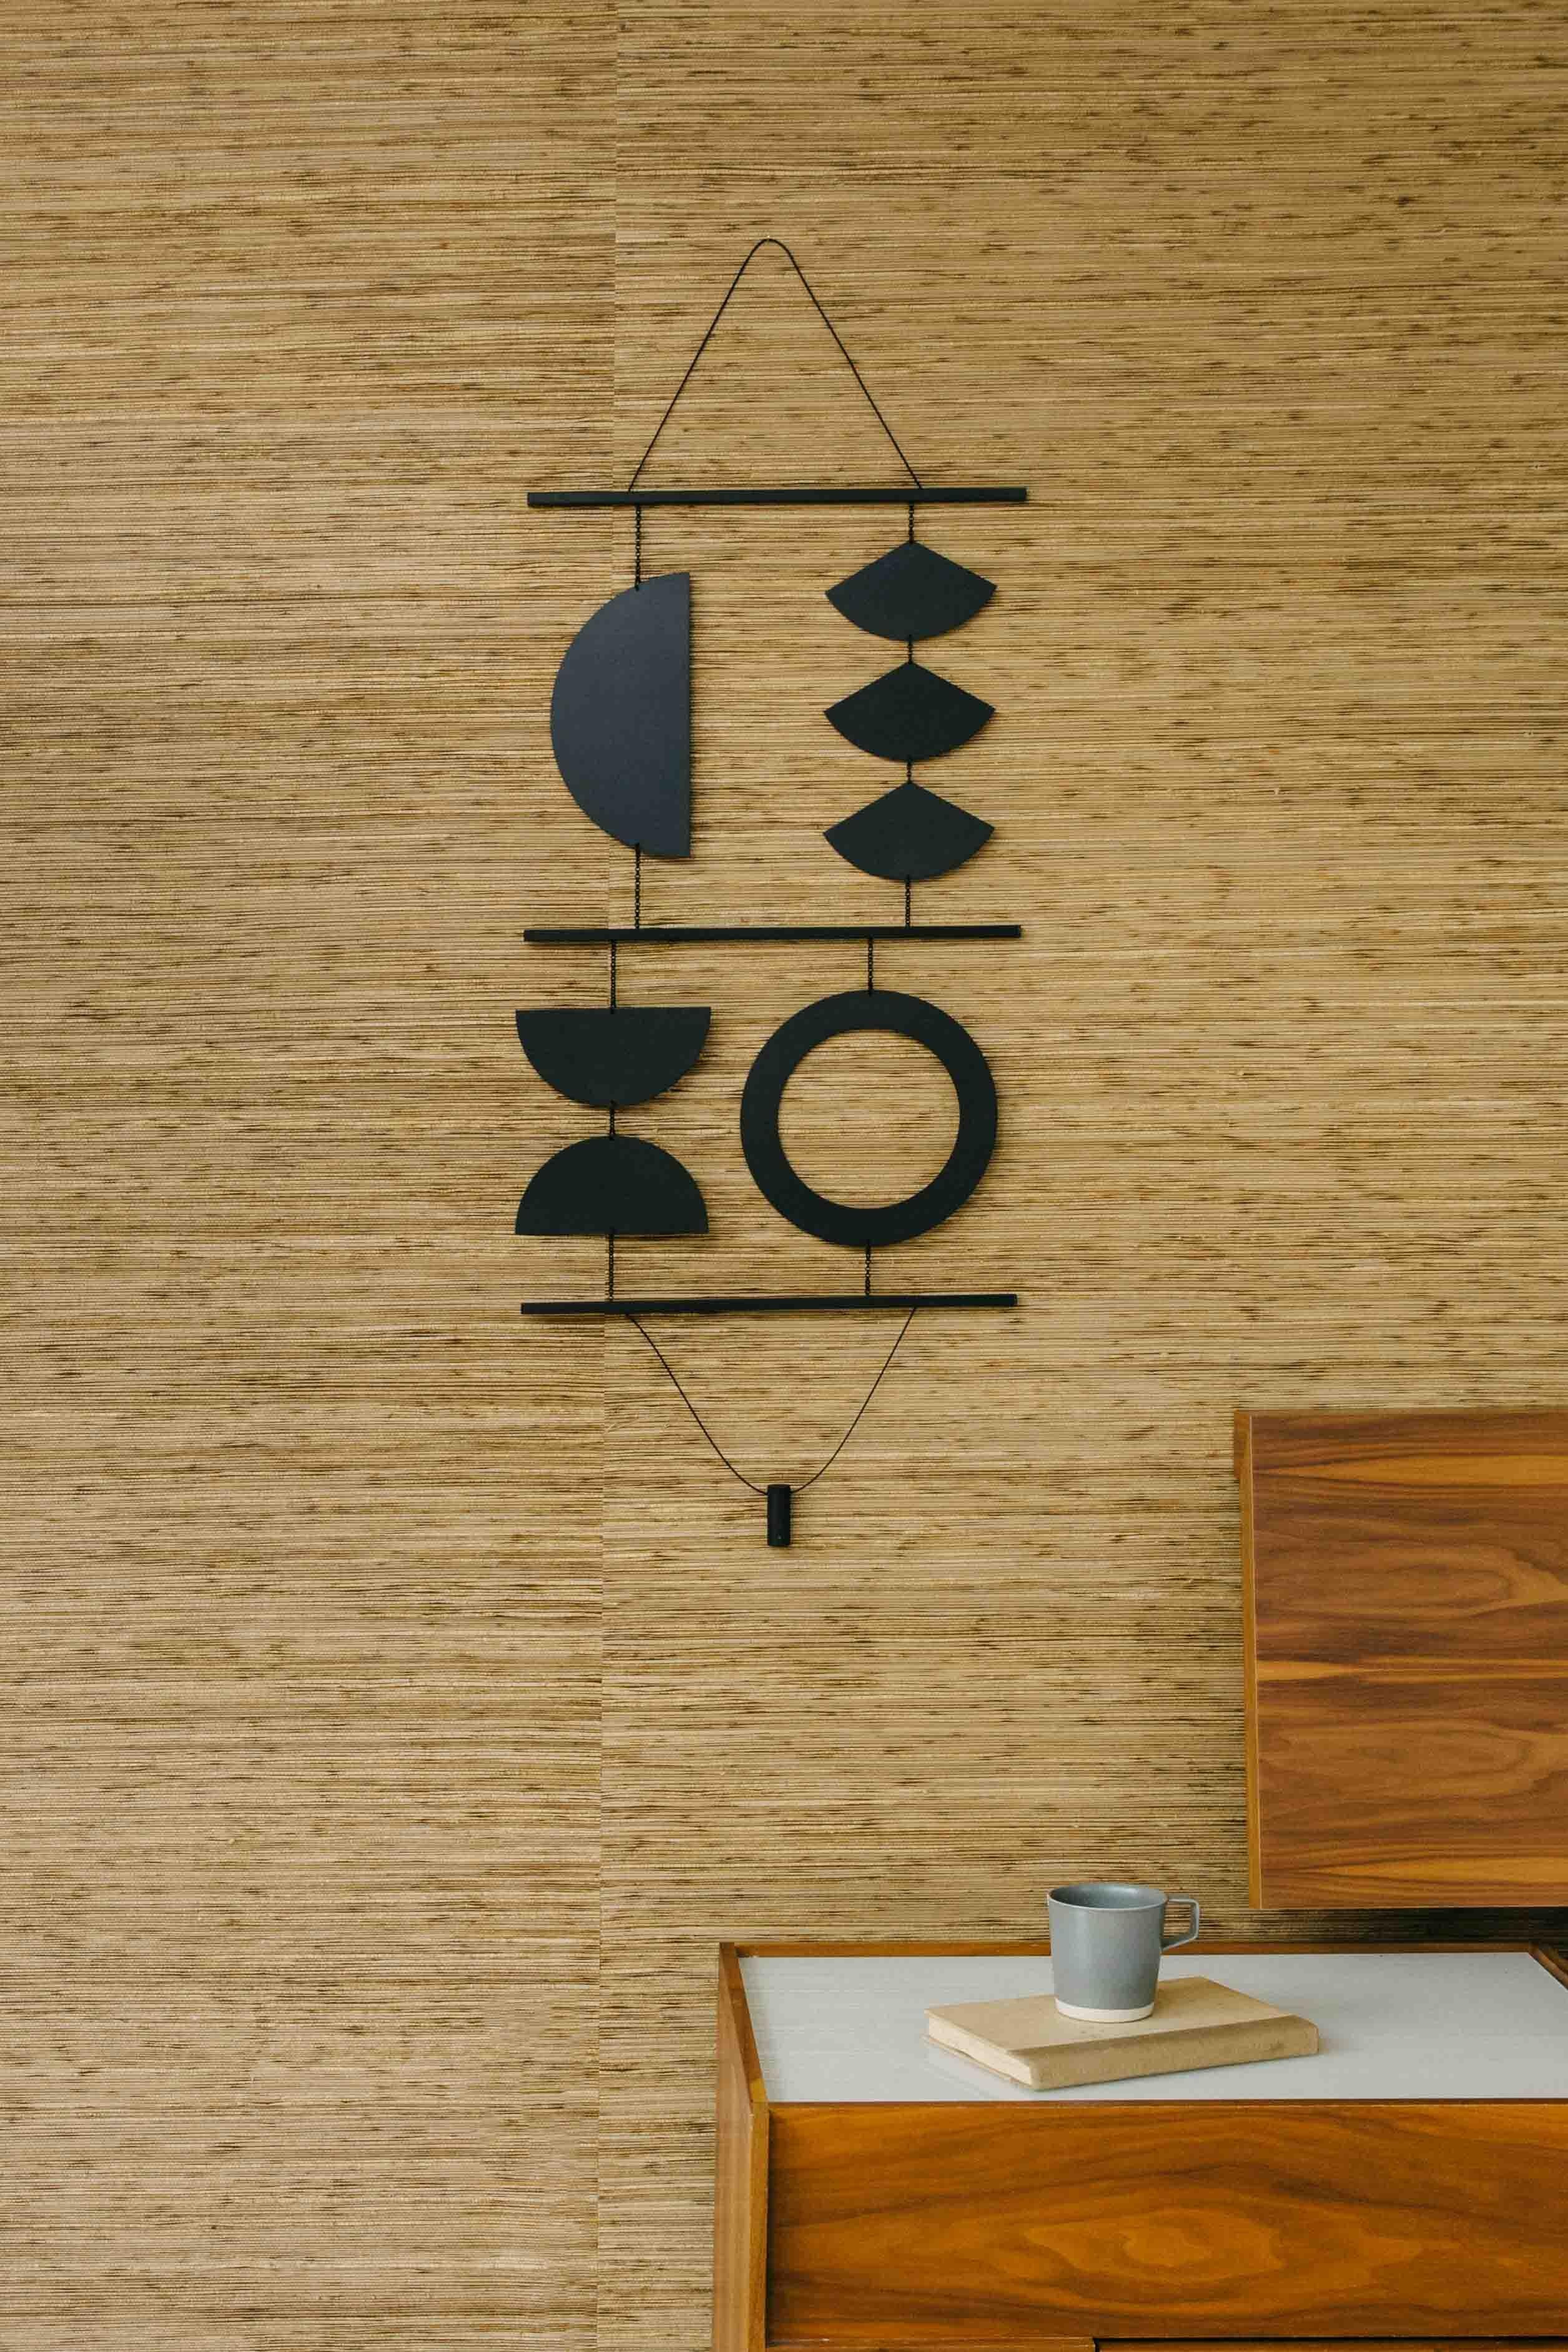 The Quadrant Wall Hanging is referential to hanging tapestries and mid-century design. The unique composition is accentuated by the larger scale and bold geometric components. The striking black finish adds a graphic feeling to this distinctive